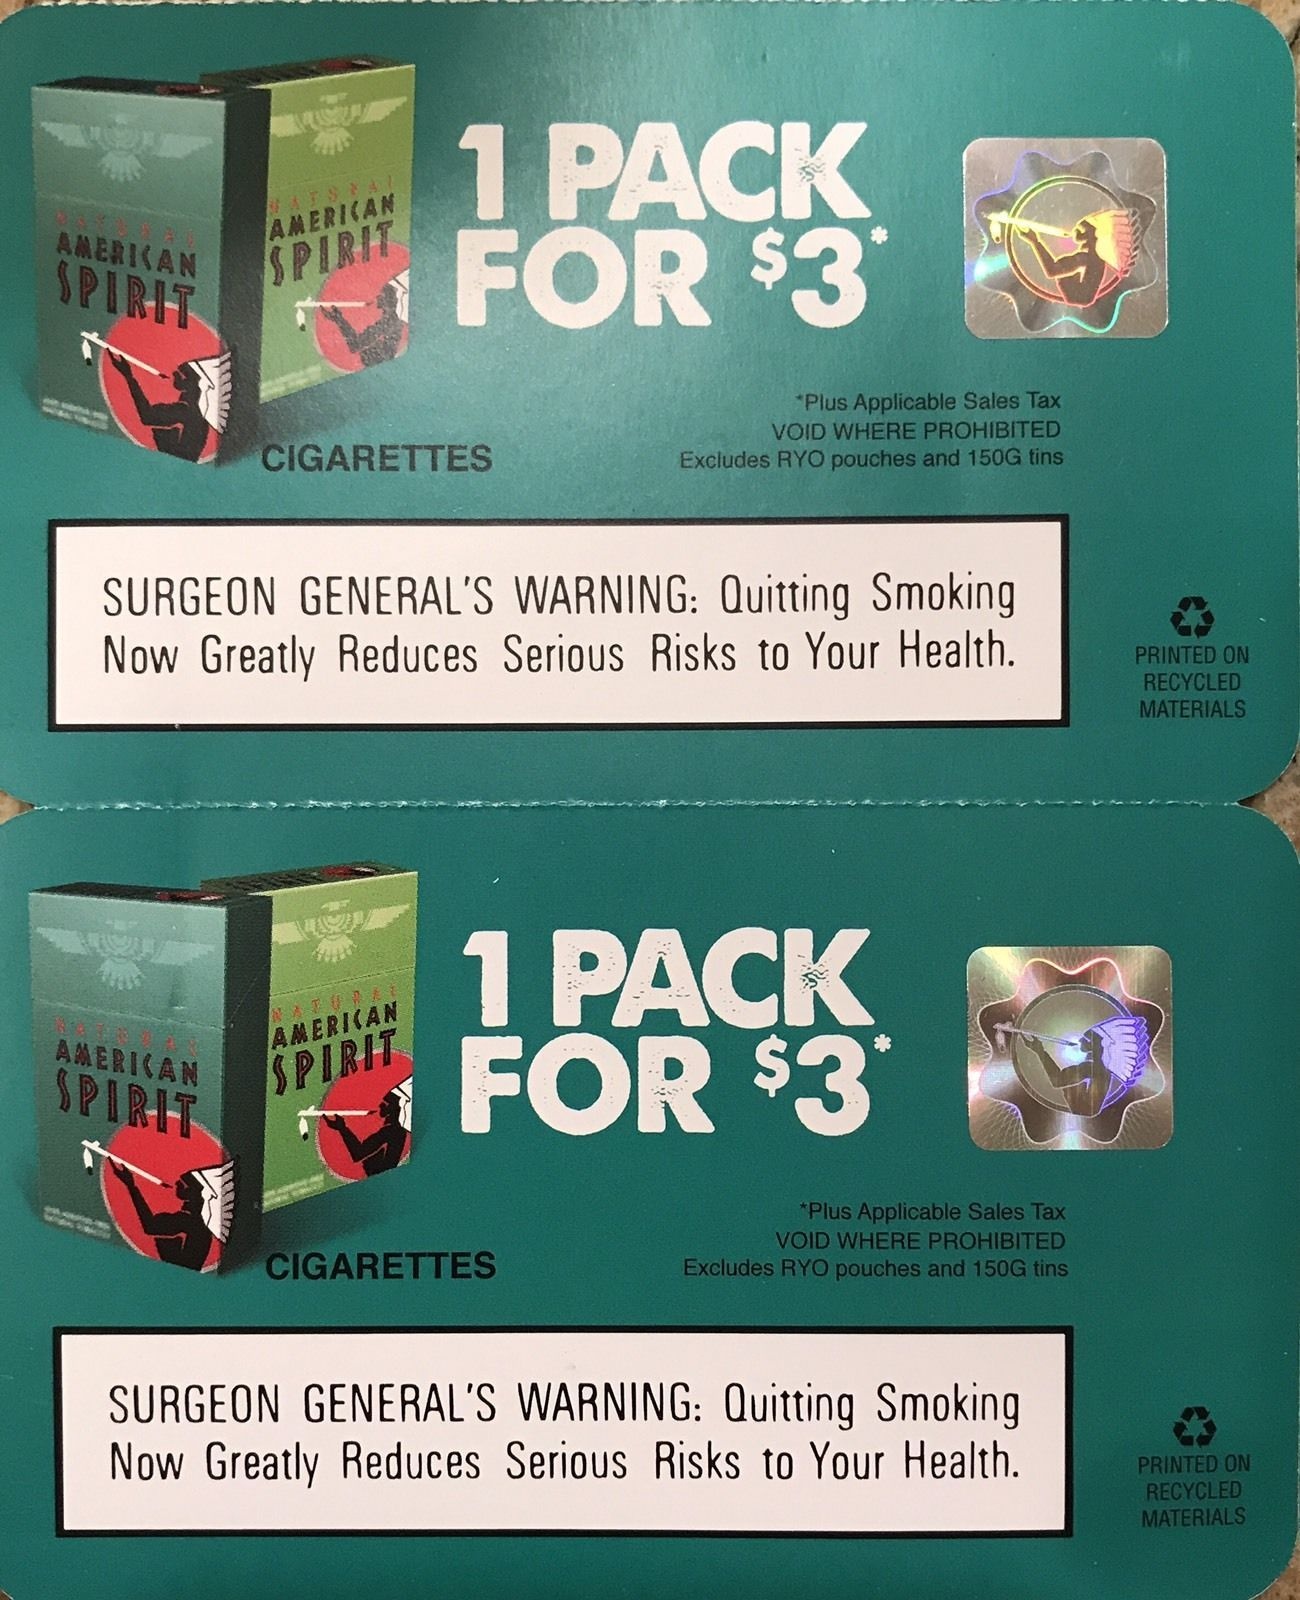 Free Pack Of Cigarettes Coupon - Wow - Image Results | My - Free Pack Of Cigarettes Printable Coupon